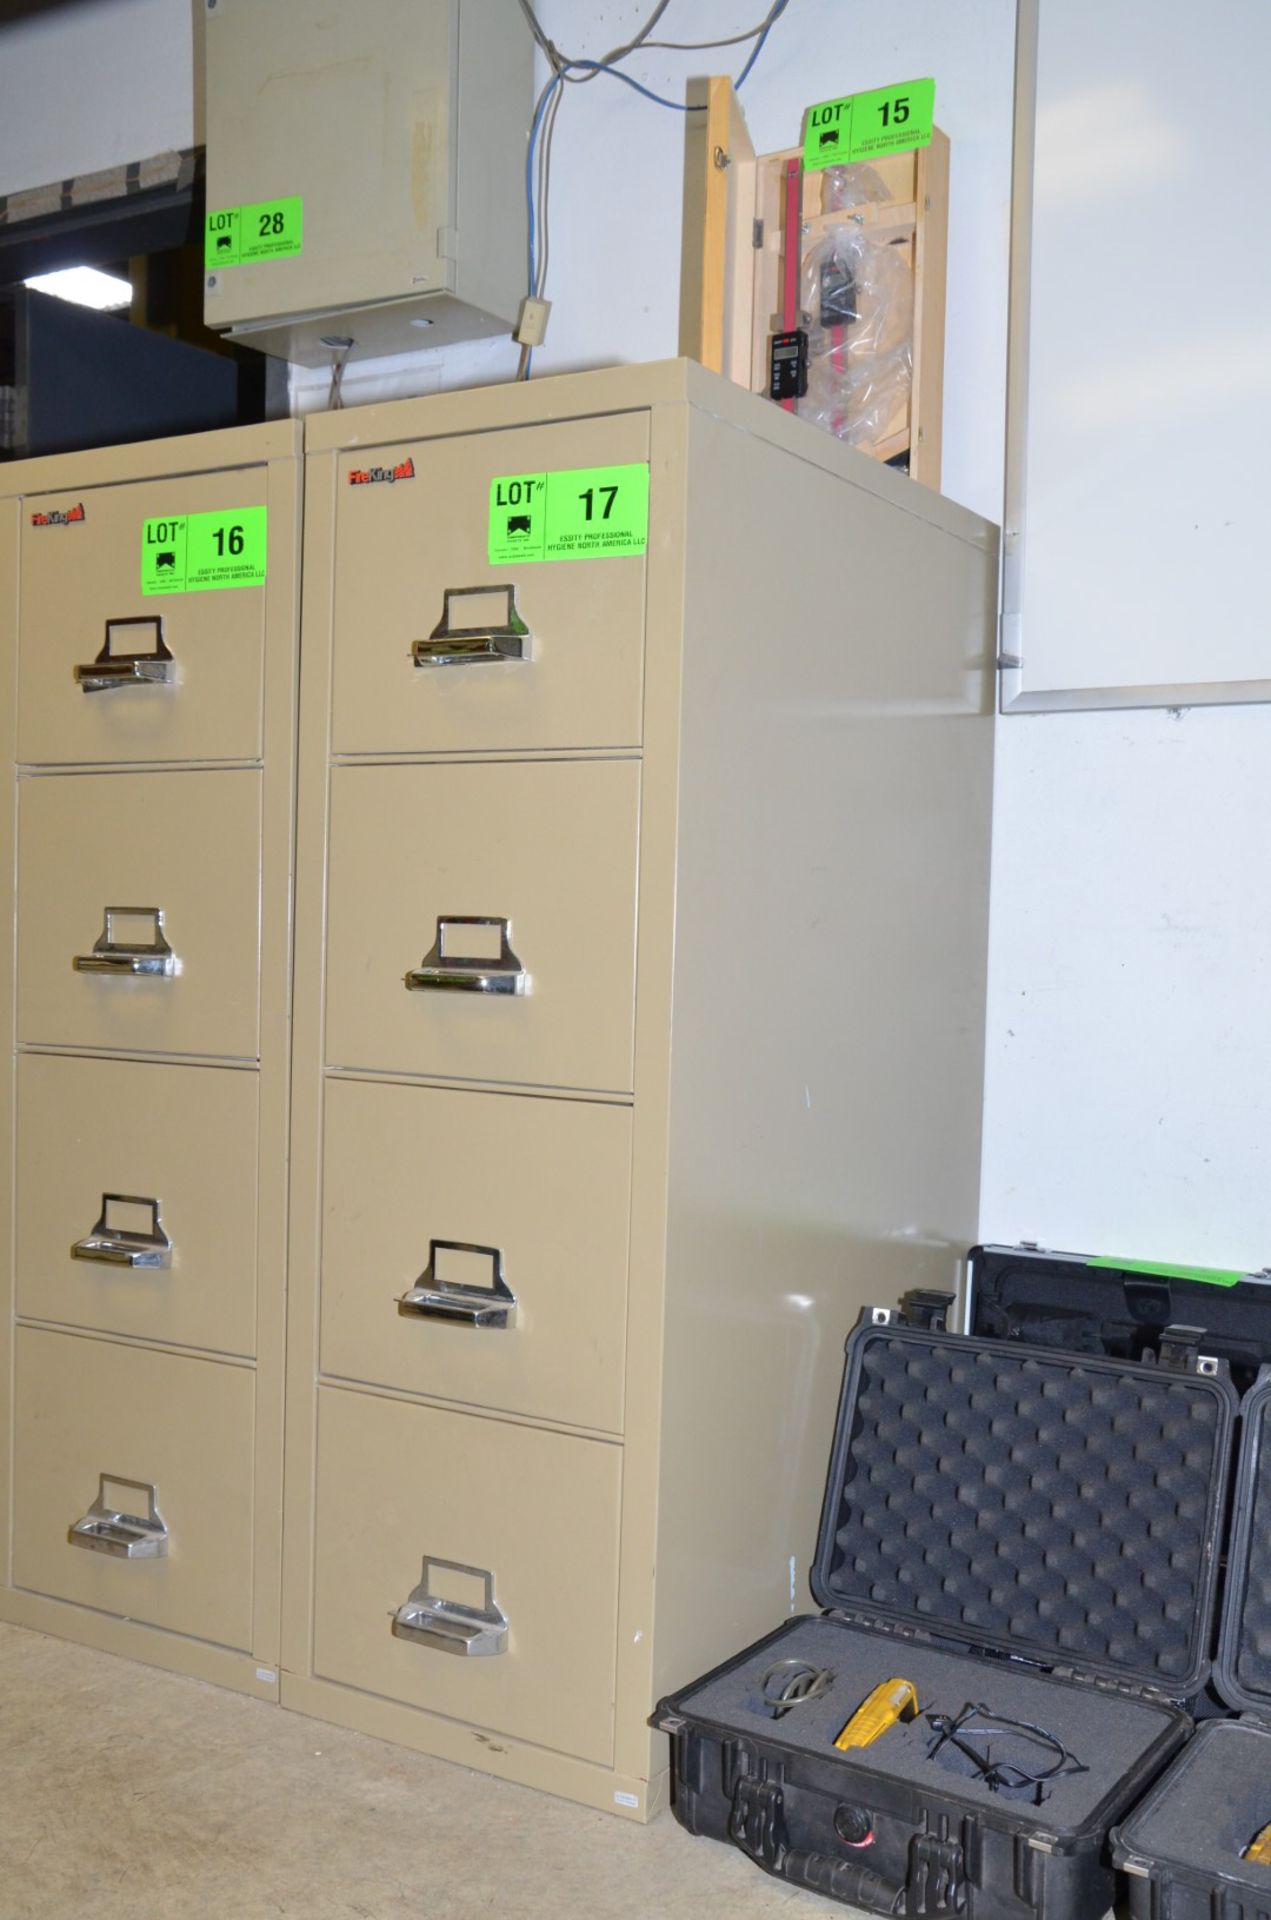 FIRE KING 4-DRAWER FIRE PROOF FILE CABINET [RIGGING FEE FOR LOT #17 - $50 USD PLUS APPLICABLE